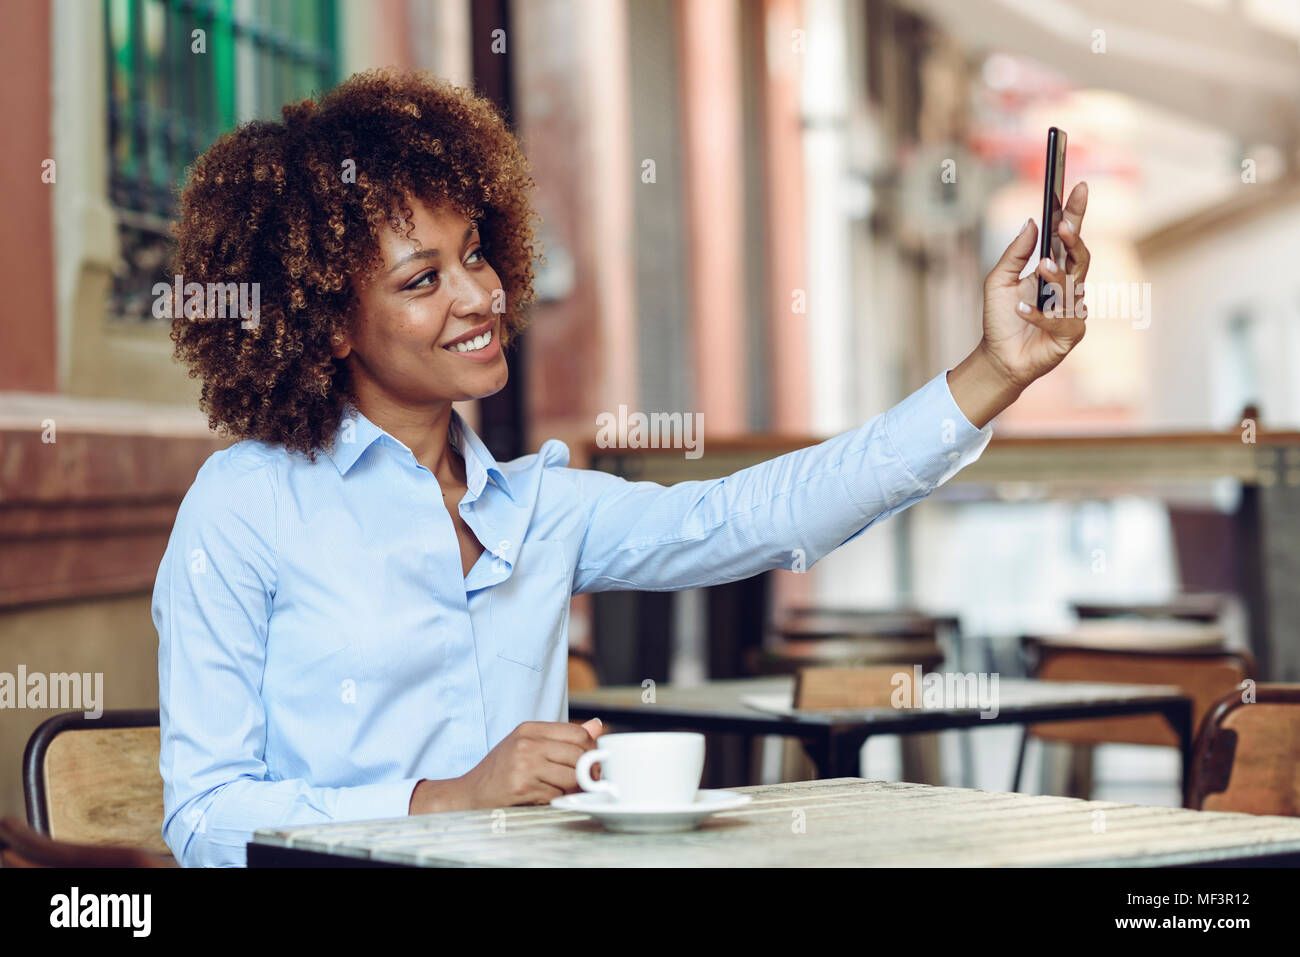 Spain, Andalusia, Malaga.Black woman, afro hairstyle, taking a selfie photograph with a smartphone, sitting in a coffee shop. Happy girl smiling in ur Stock Photo